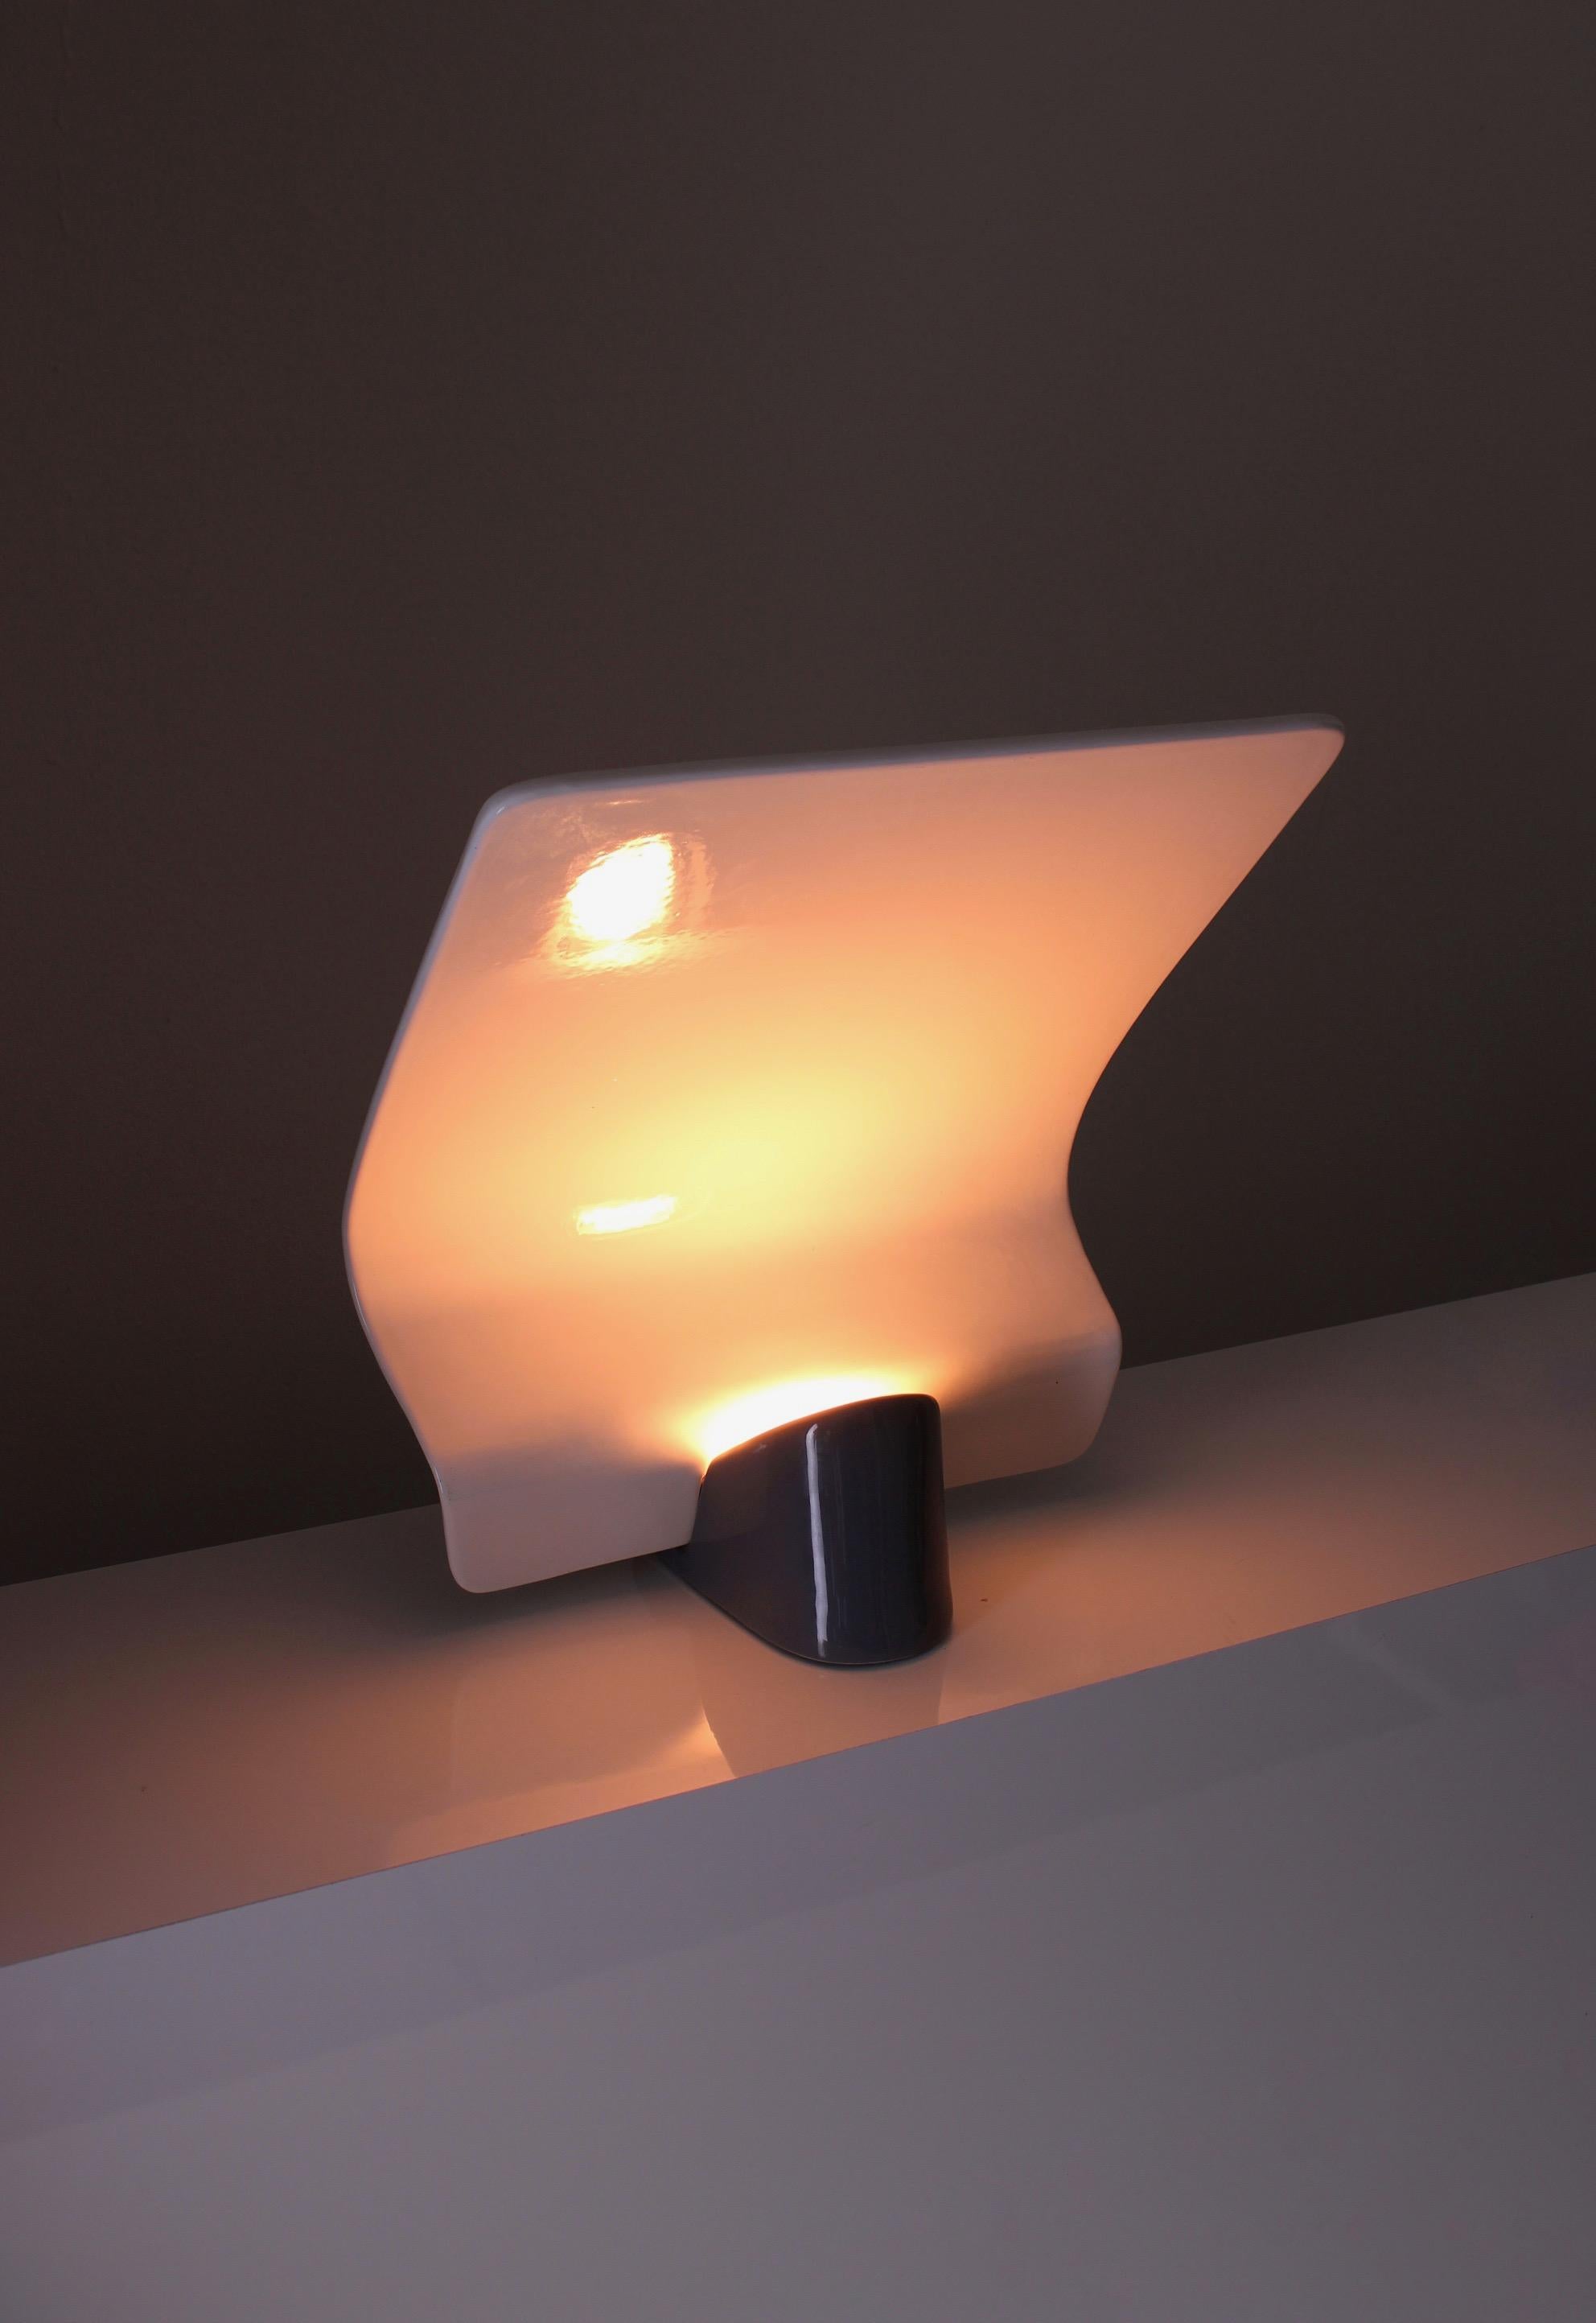 Rare table lamp model Maia designed by Arturo Silva in circa 1990. Produced by Italian manufacturer Antonangeli. In the end of the 1980s Antonangeli offered a new series of porcelain lighting designed by Bruno Gecchelin, Laura Mandelli, Franca